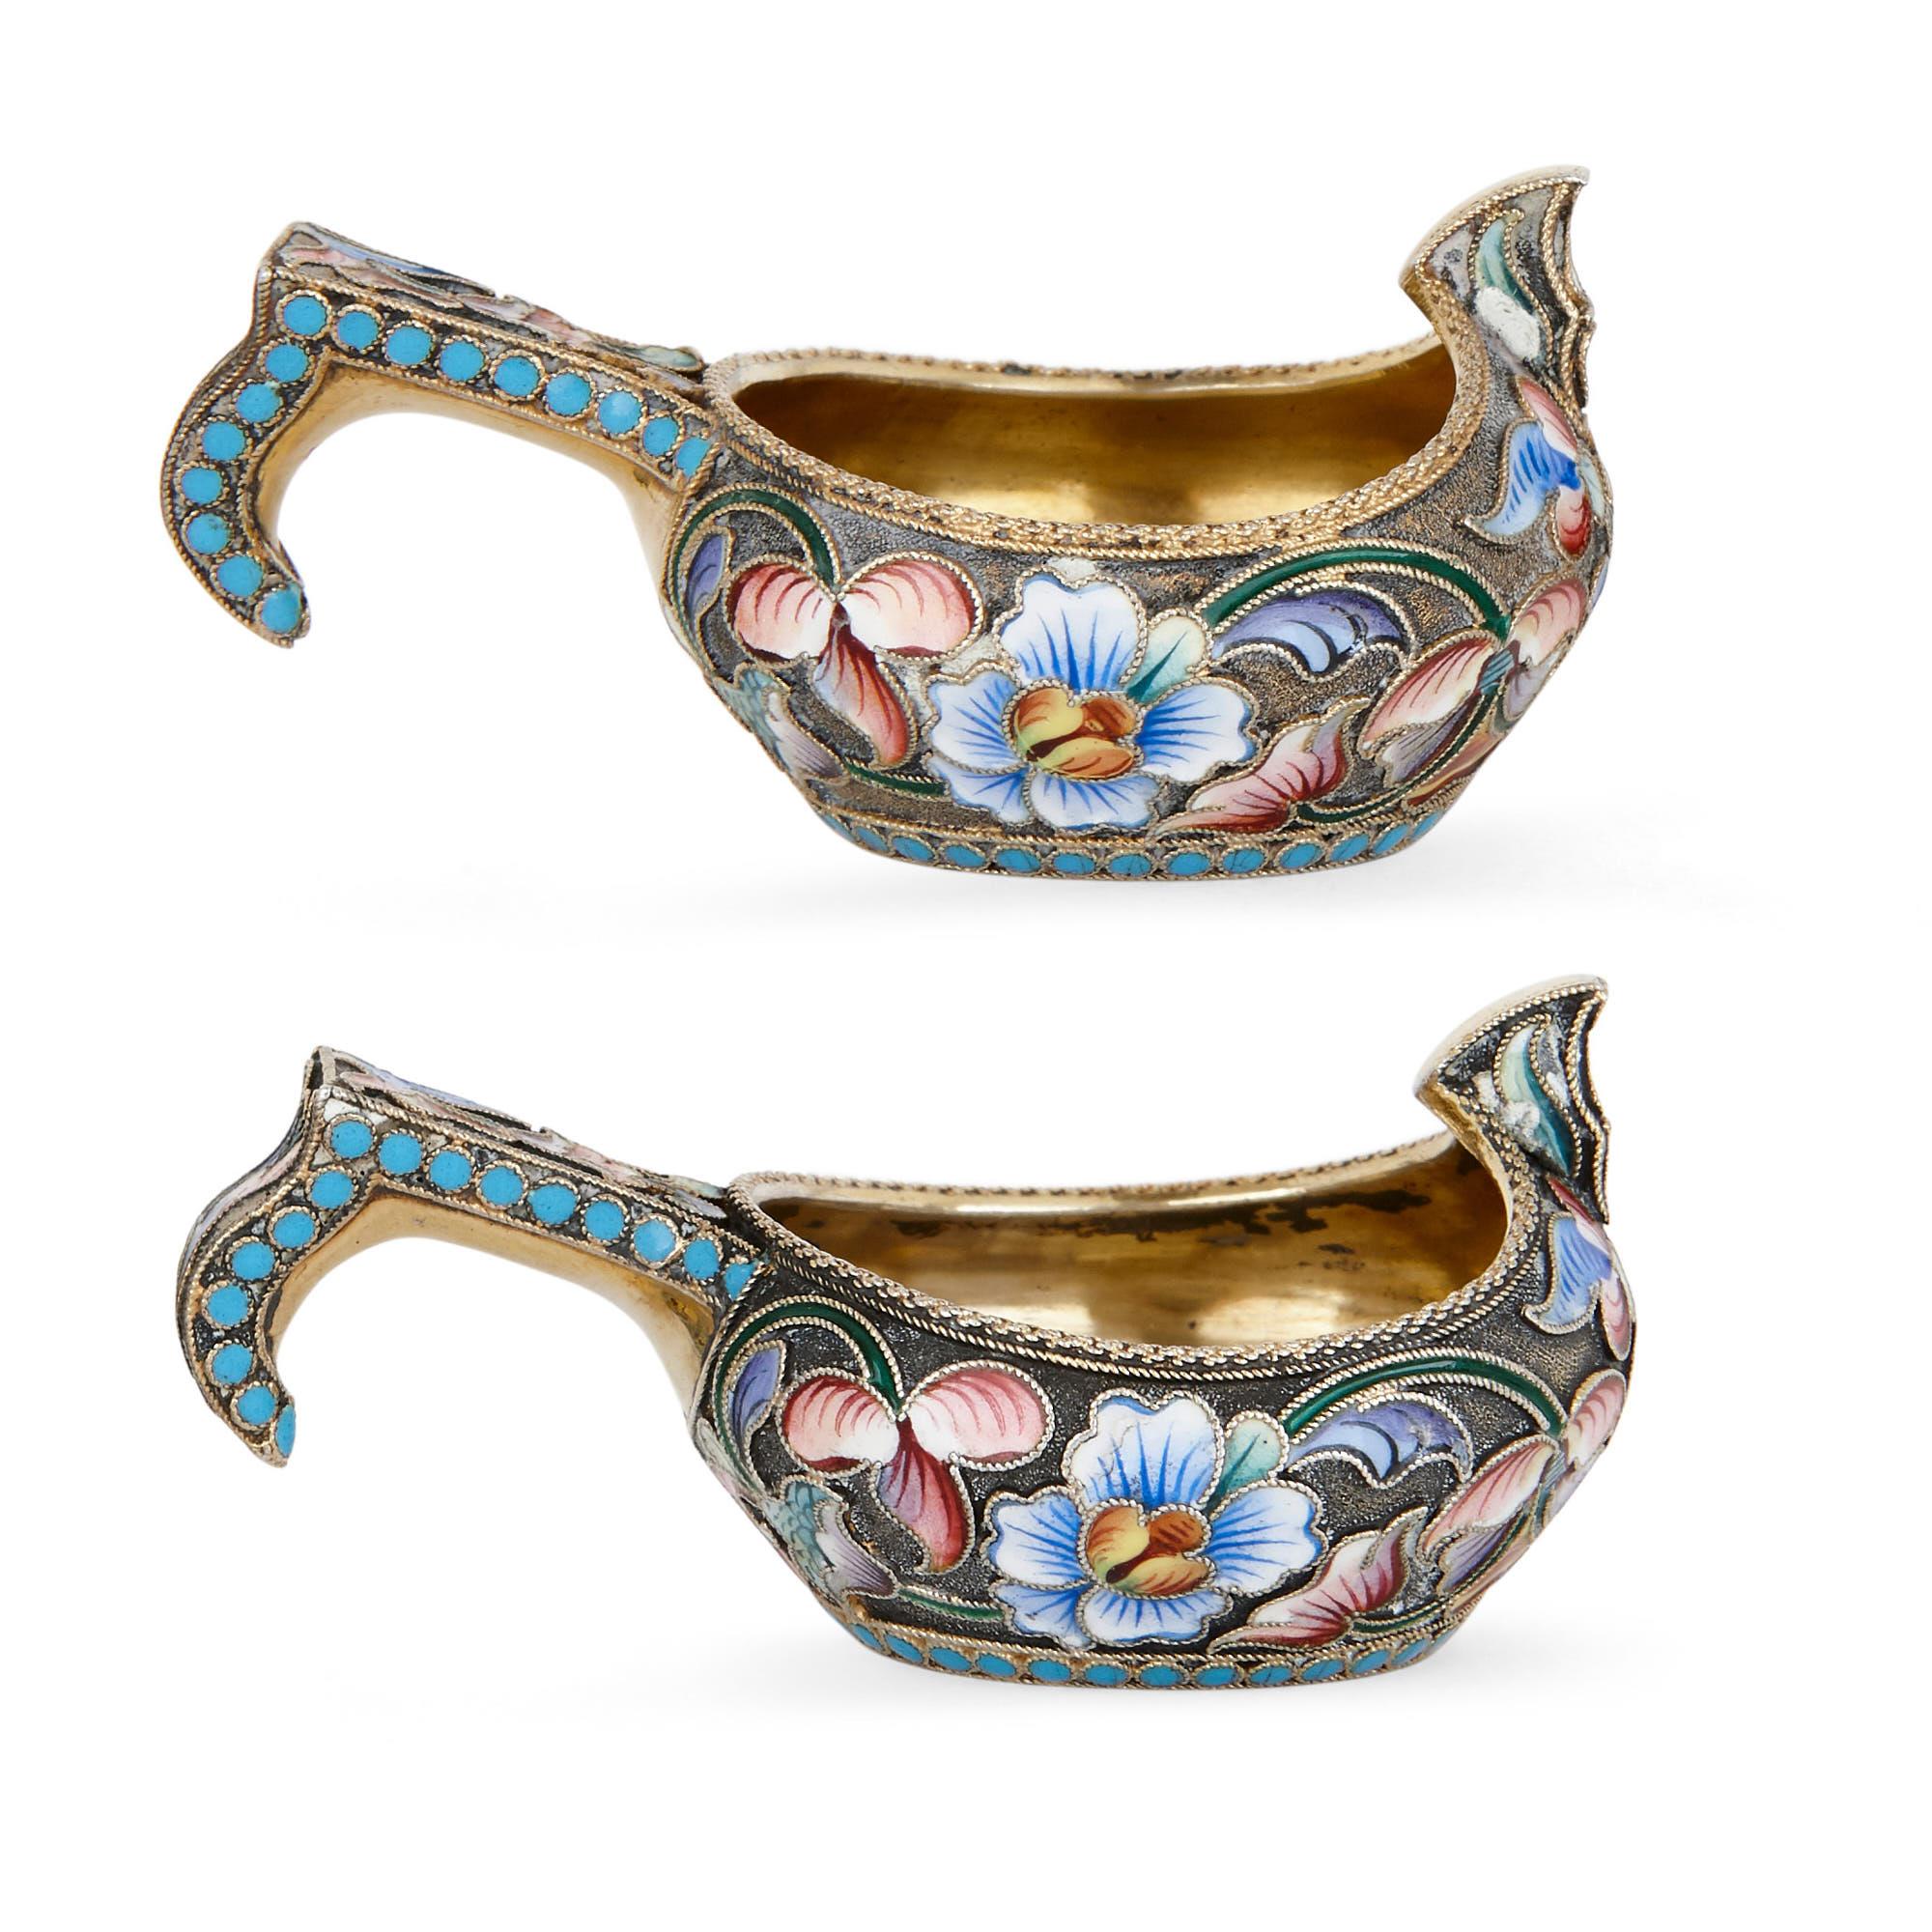 Russian Antique Pair of Silver-Gilt and Enamel Kovshes by Semenova For Sale